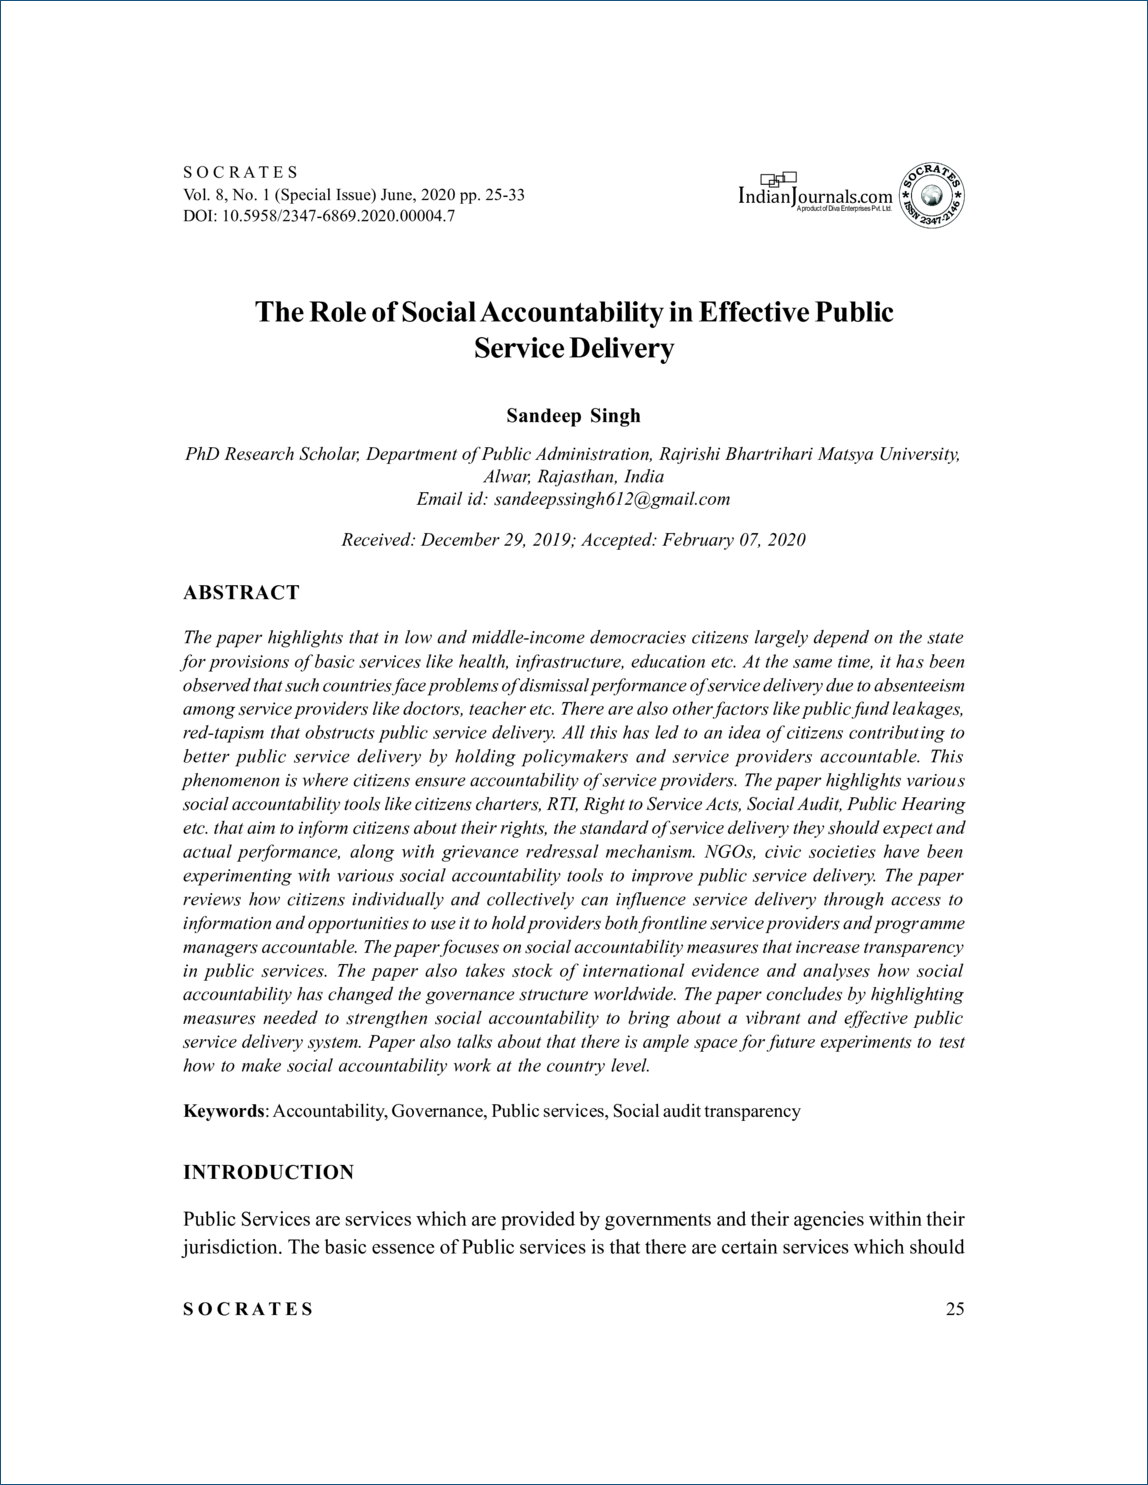  The Role of Social Accountability in Effective Public Service Delivery 